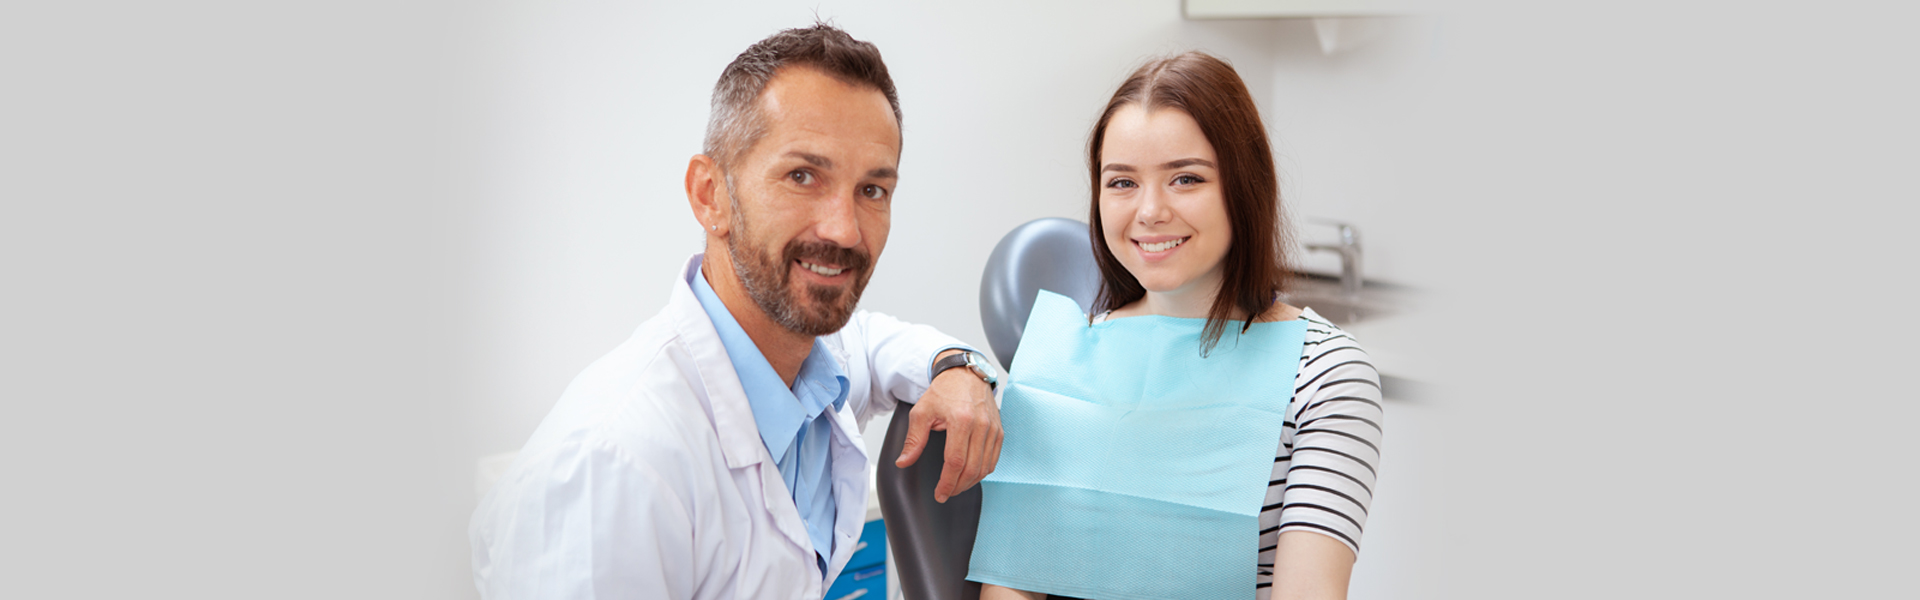 Dental Exams & Cleanings in Markham, ON